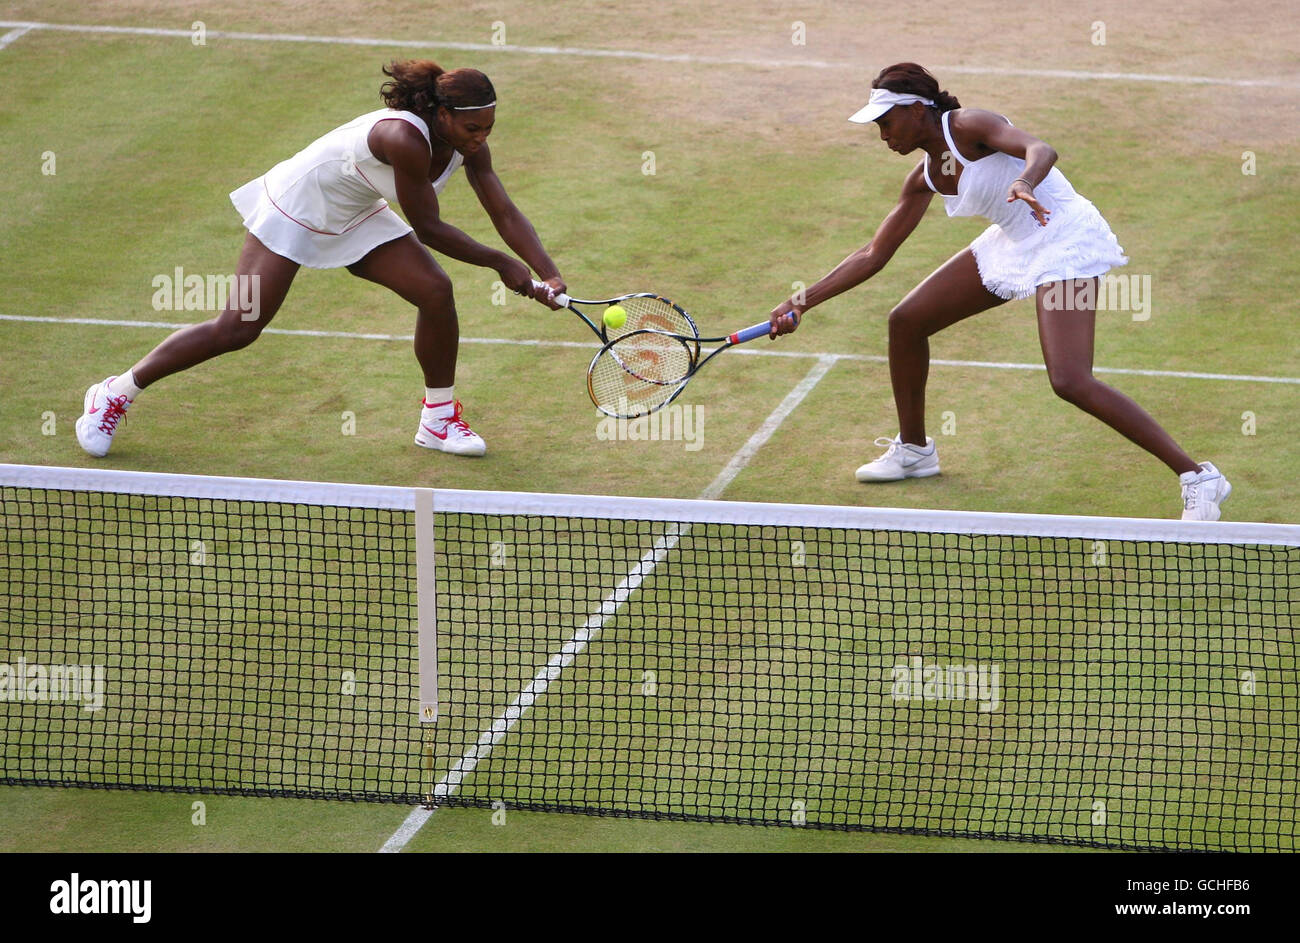 USA's Venus (right) and Serena Williams in their doubles match against Switzerland's Timea Bacsinszky and Italy's Tathiana Garbin during Day Five of the 2010 Wimbledon Championships at the All England Lawn Tennis Club, Wimbledon. Stock Photo